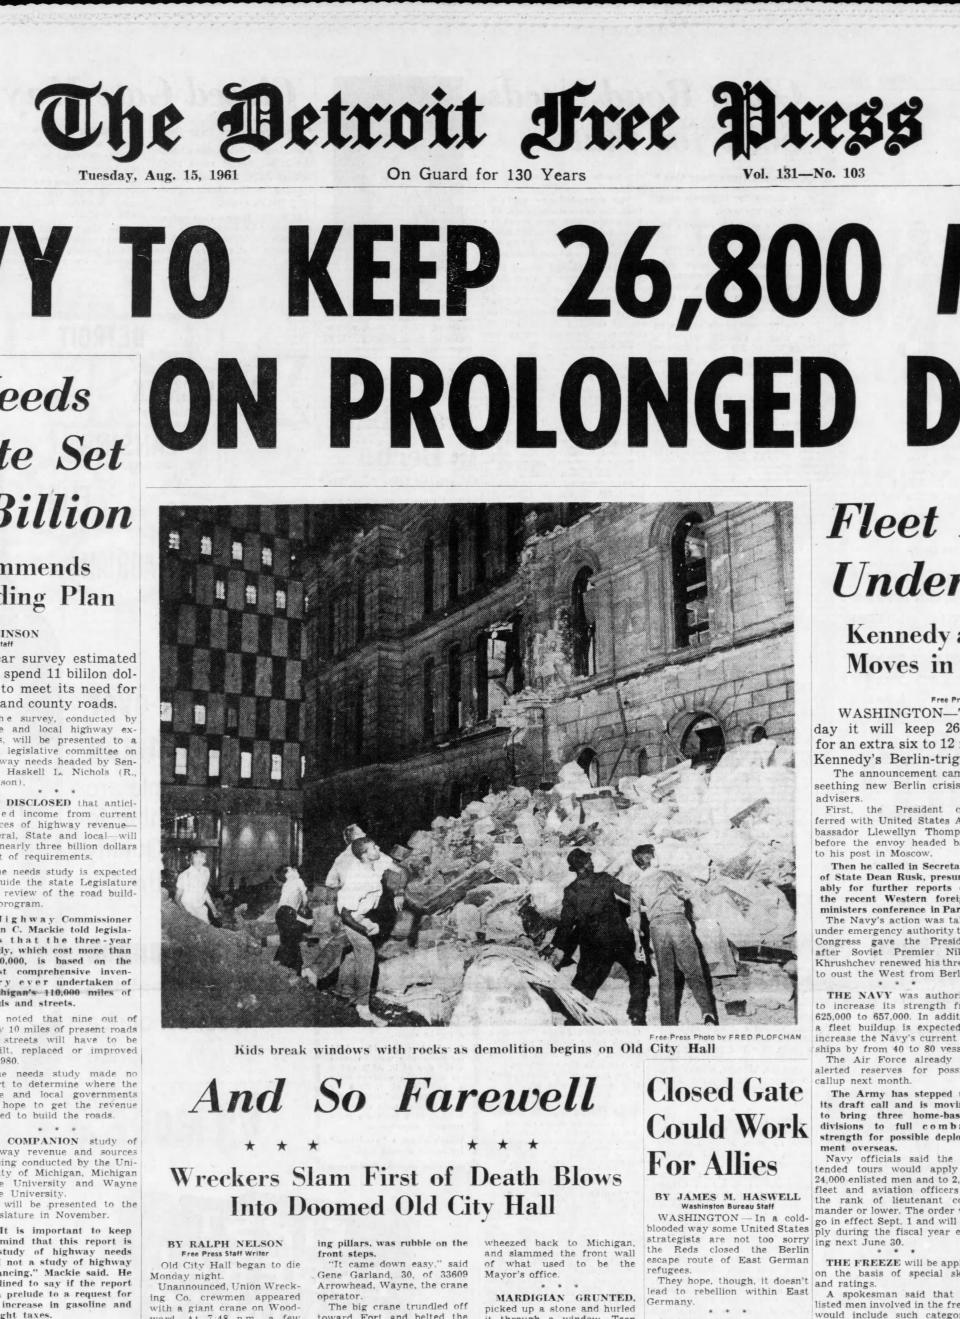 The August 15, 1961, front page of the Free Press described the beginning of the demolition of City Hall.